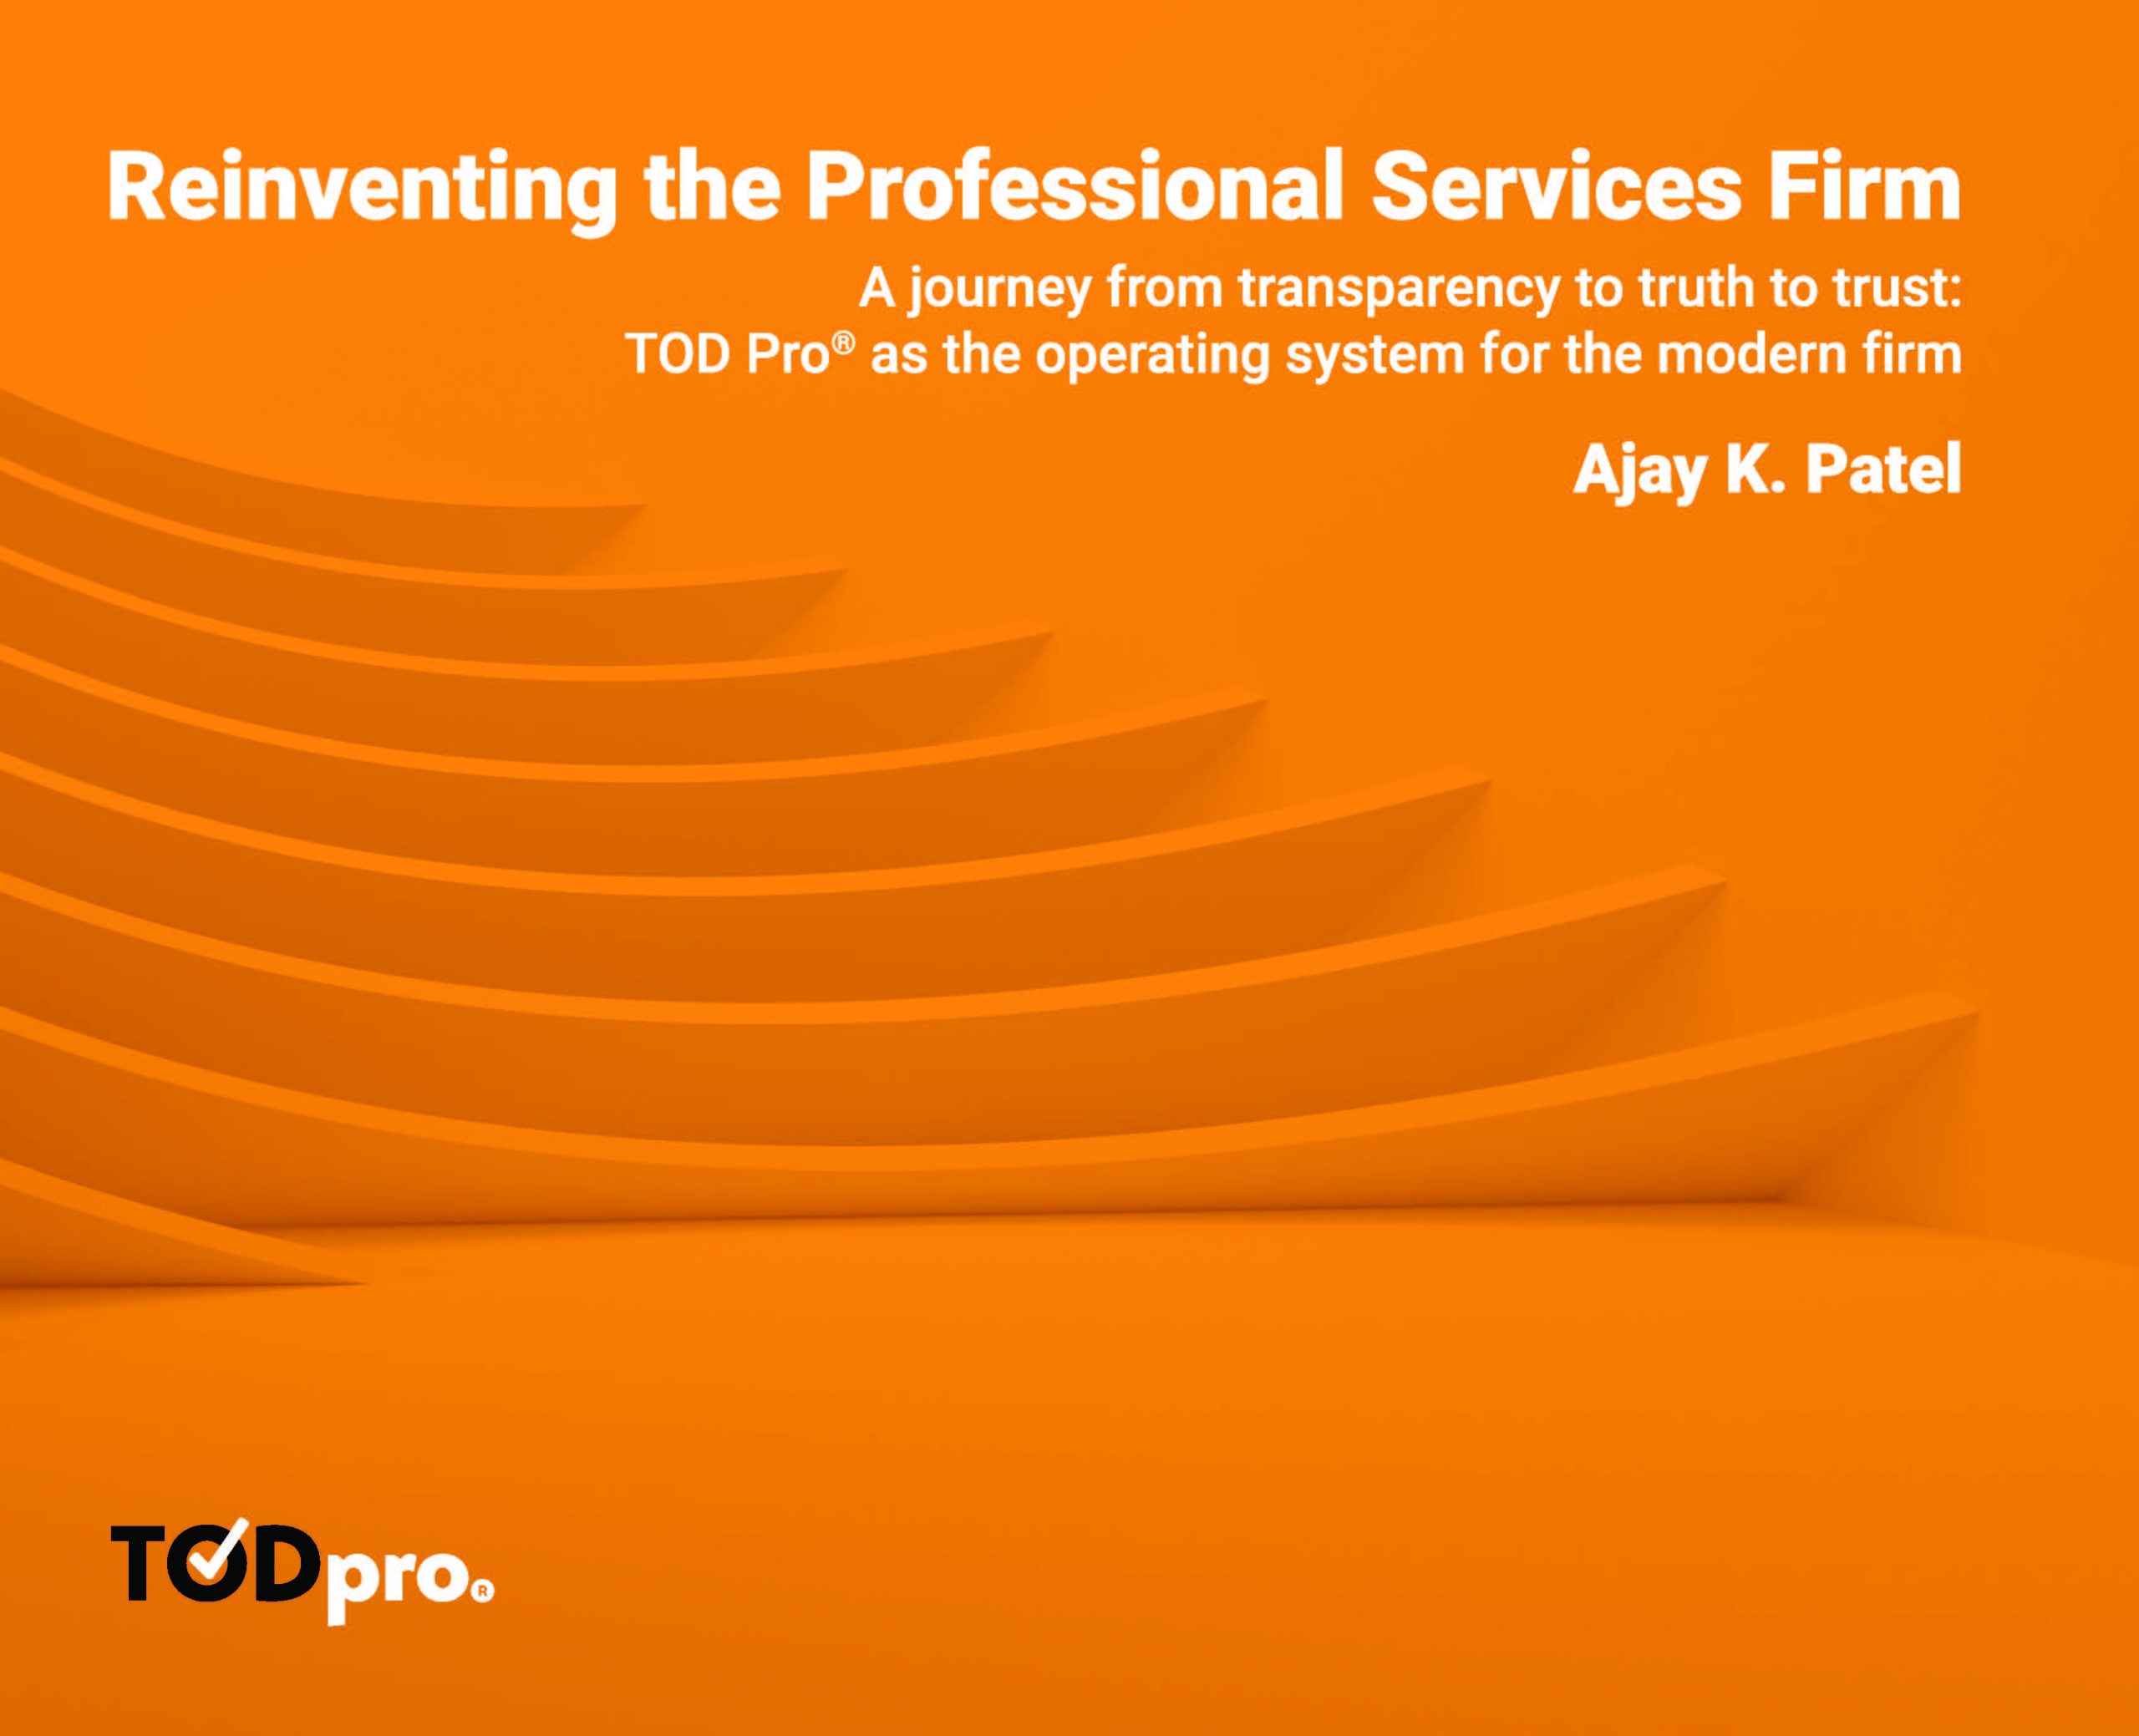 Reinventing the Professional Services Firm